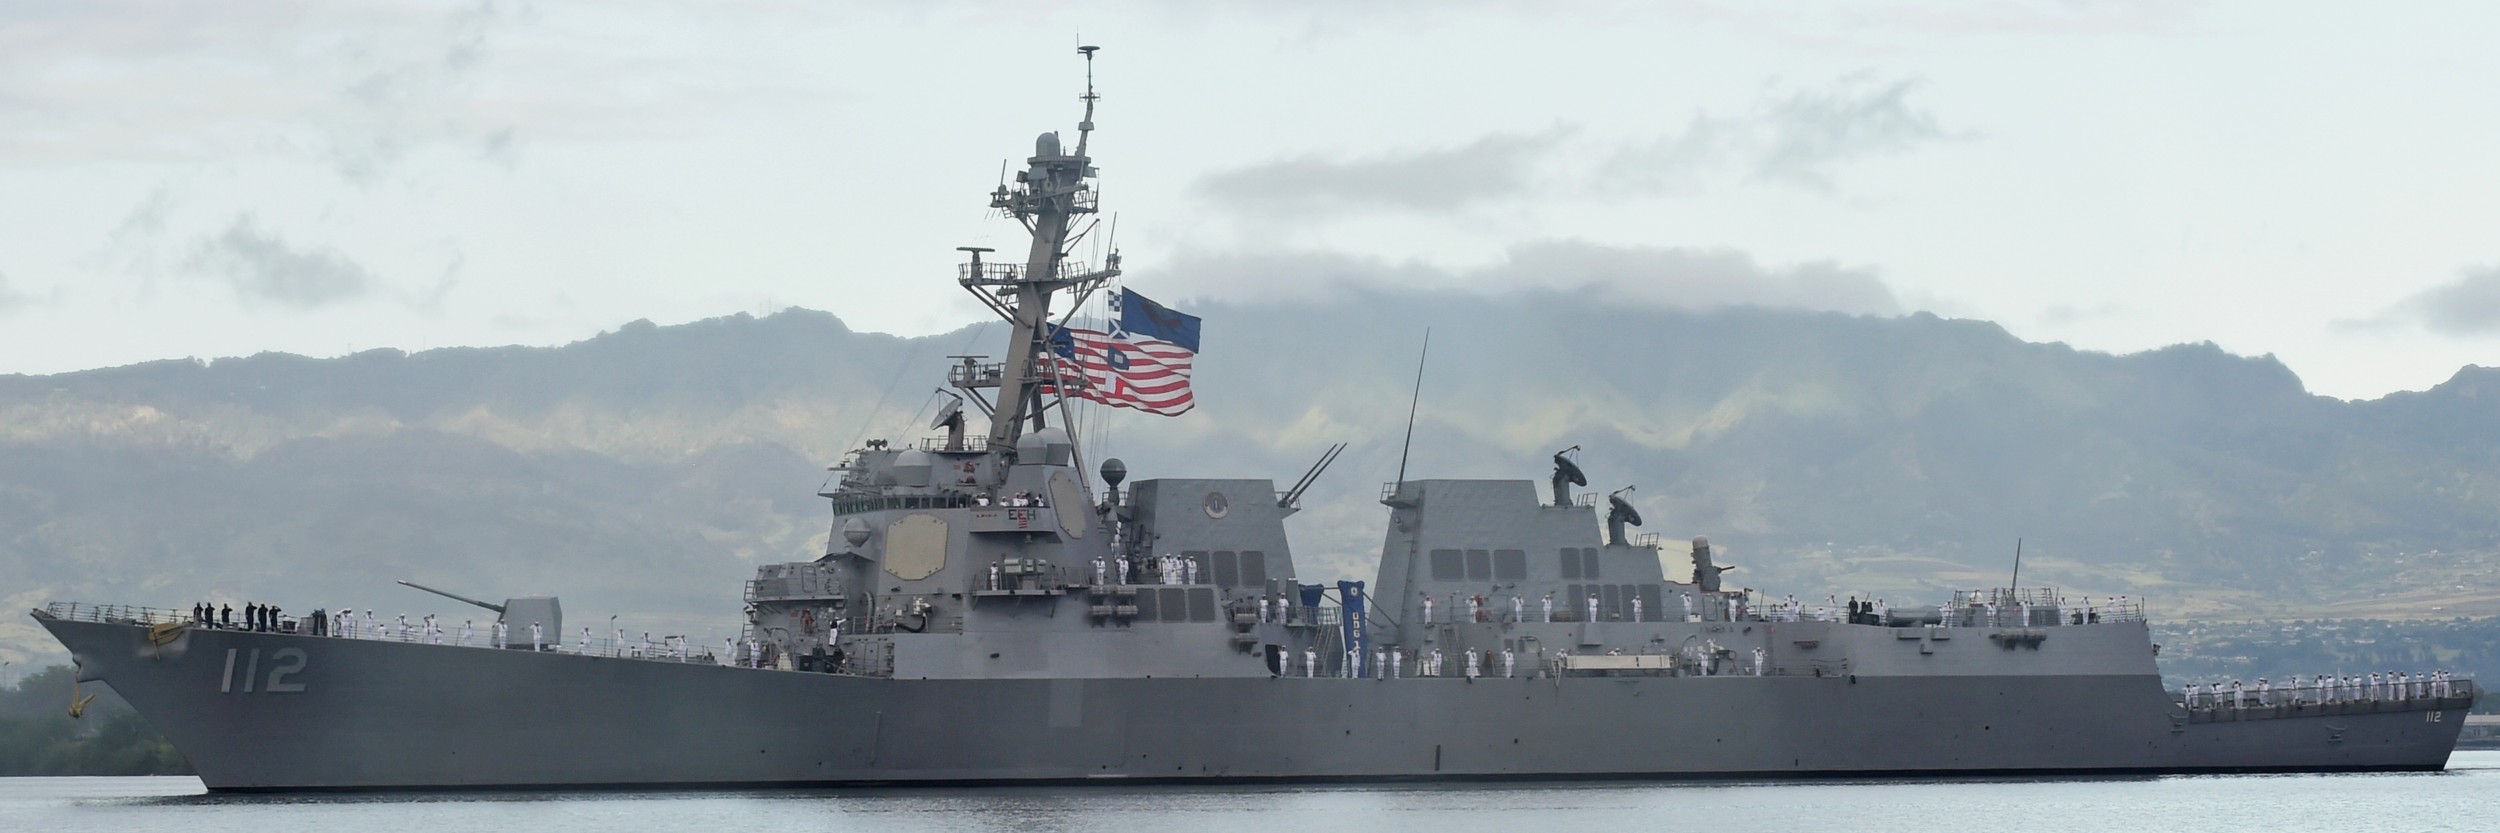 ddg-112 uss michael murphy arleigh burke class guided missile destroyer aegis us navy remembrance day pearl harbor hawaii 57